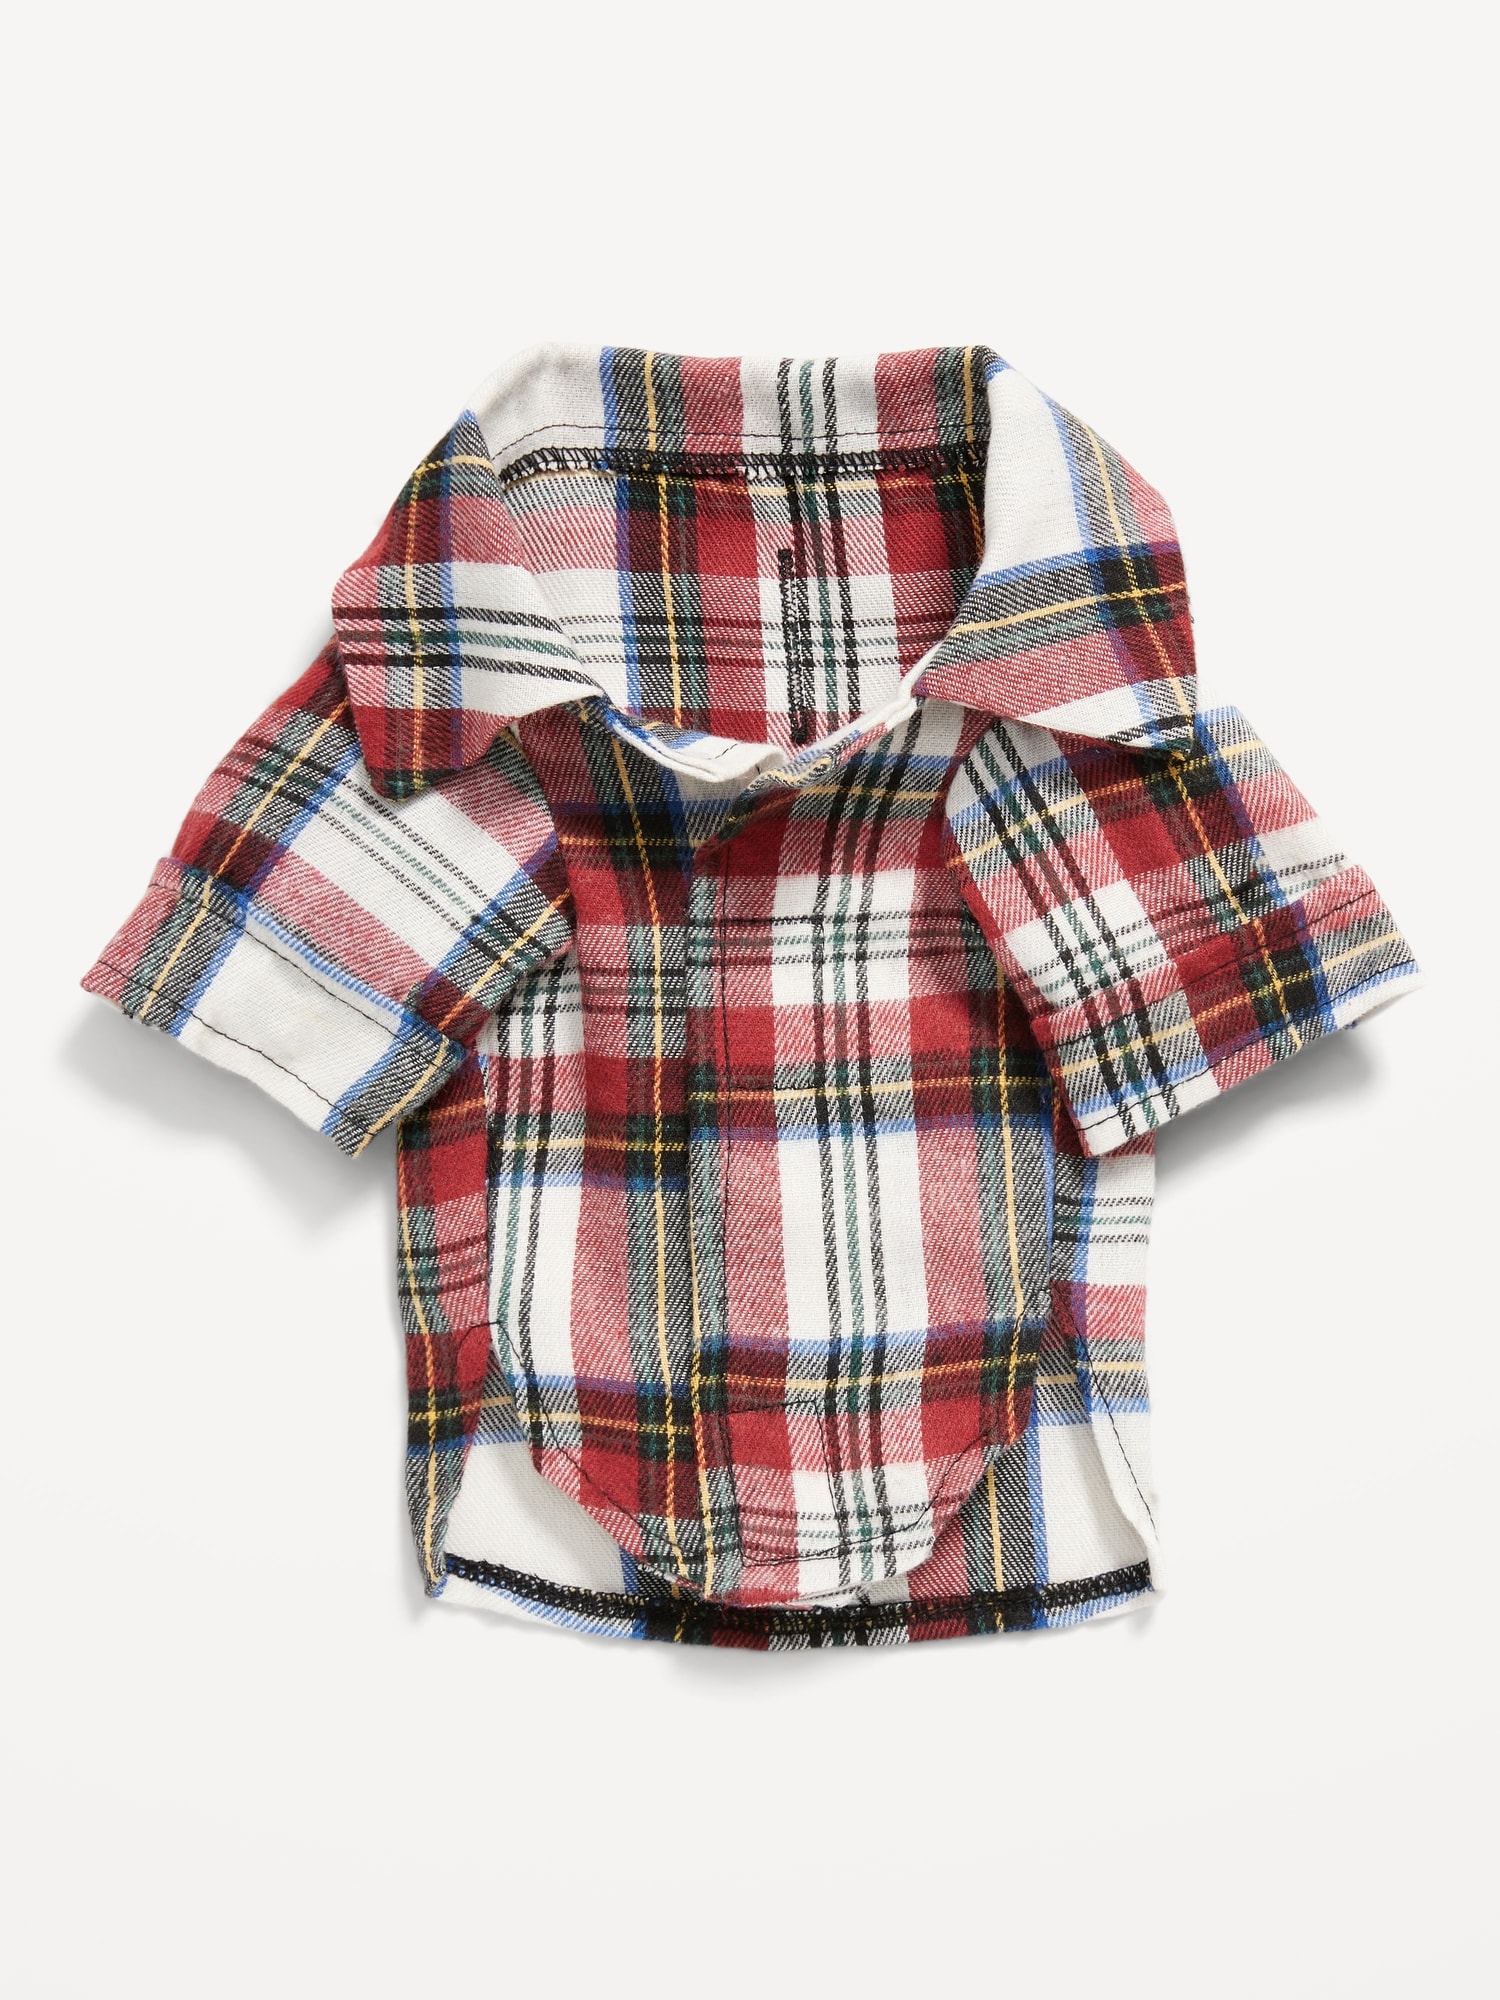 Matching Print Flannel Shirt for Pets | Old Navy